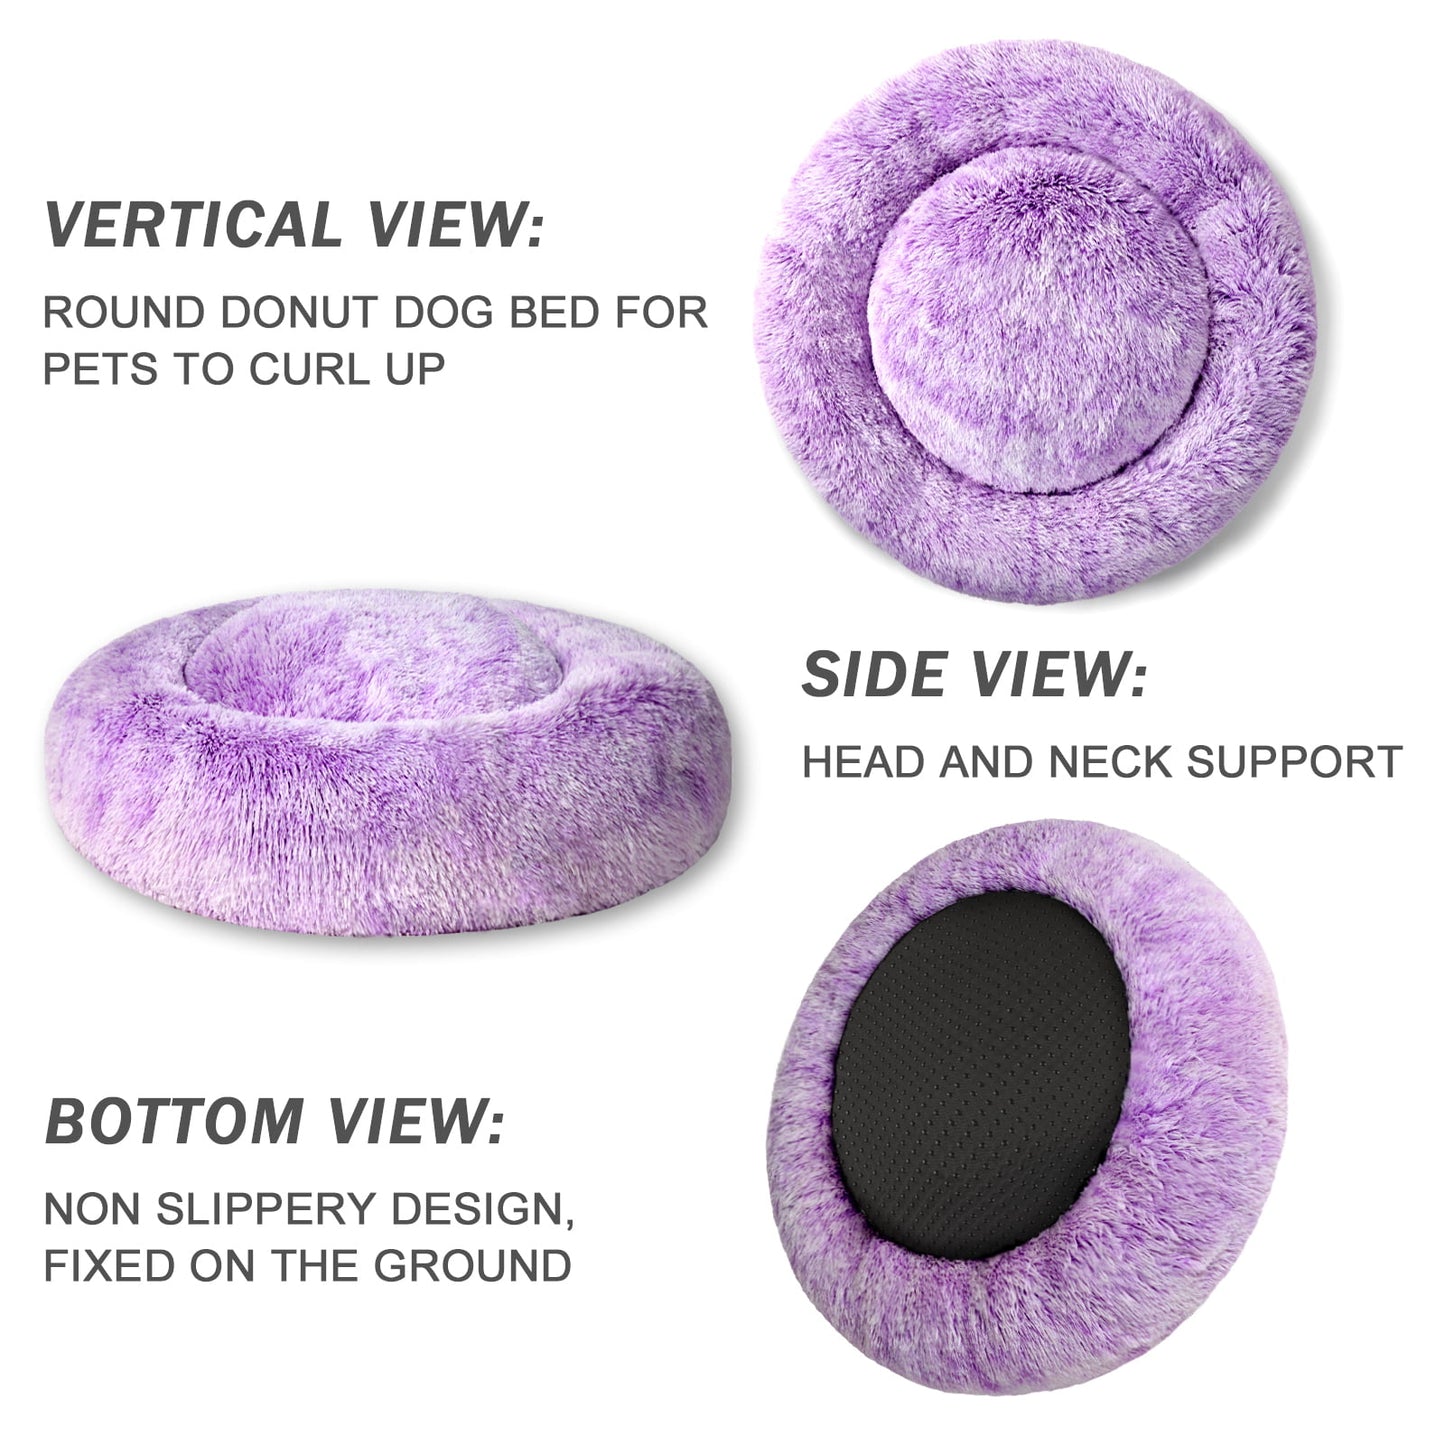 Calming Donut Dog Bed for Small Medium and Large dogs Anti-Anxiety Plush Soft and Cozy Cat Bed 36 inches Warming Pet Bed for Winter and Fall(Purple)